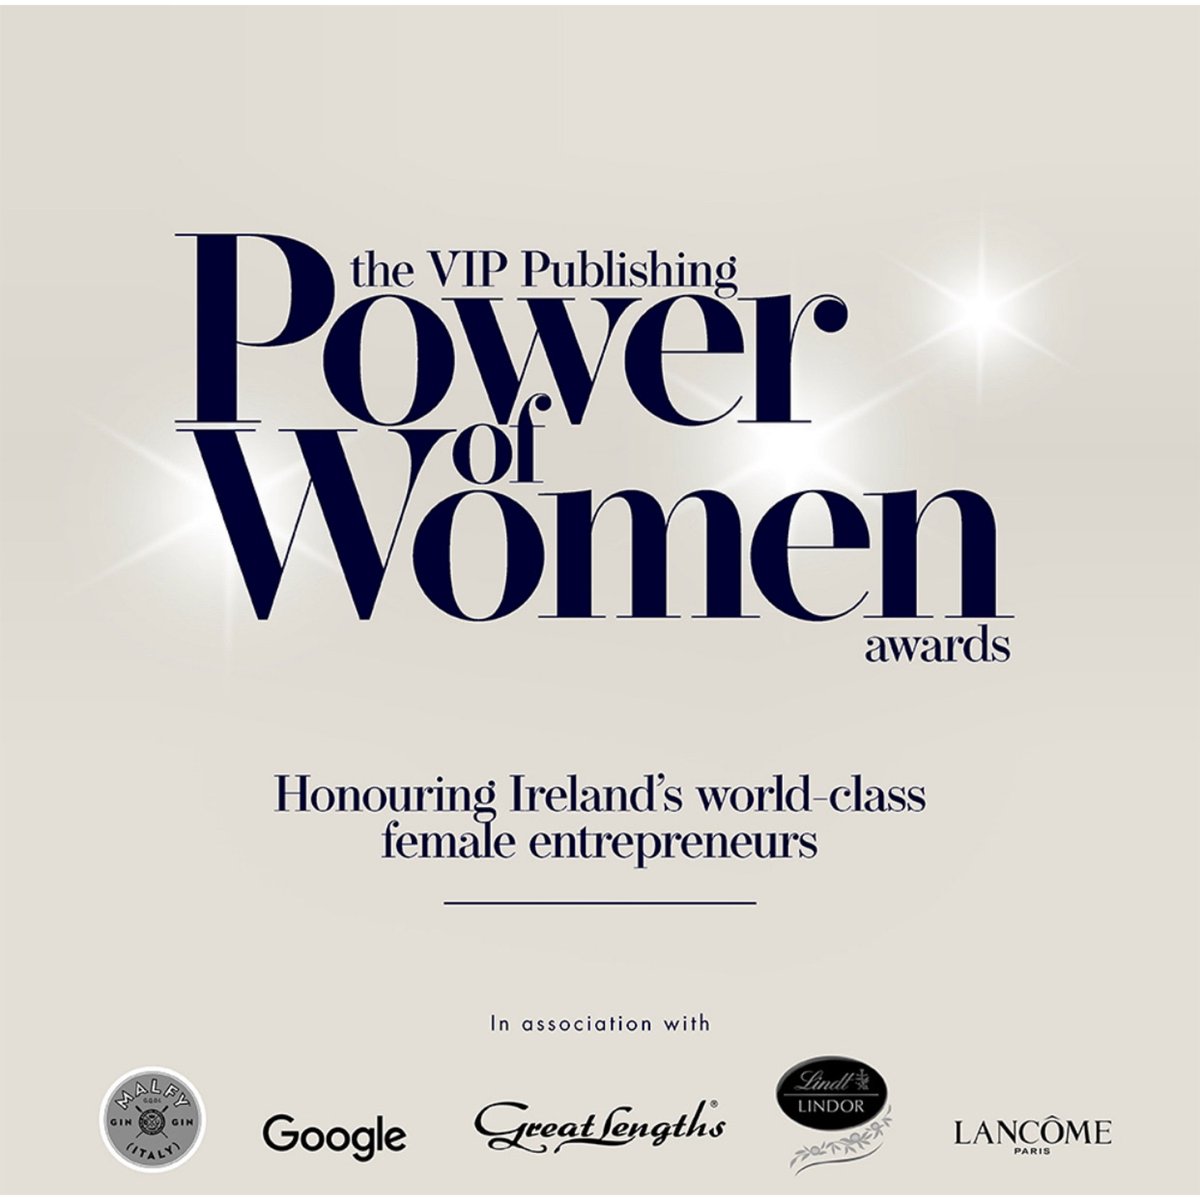 After months of hard work, I am very excited & proud to announce our  new event, The VIP Publishing Power of Women awards celebrating some of Ireland's best female entrepreneurs. Full list of nominees on vipmagazine.ie. #ThePowerofWomen #VIP